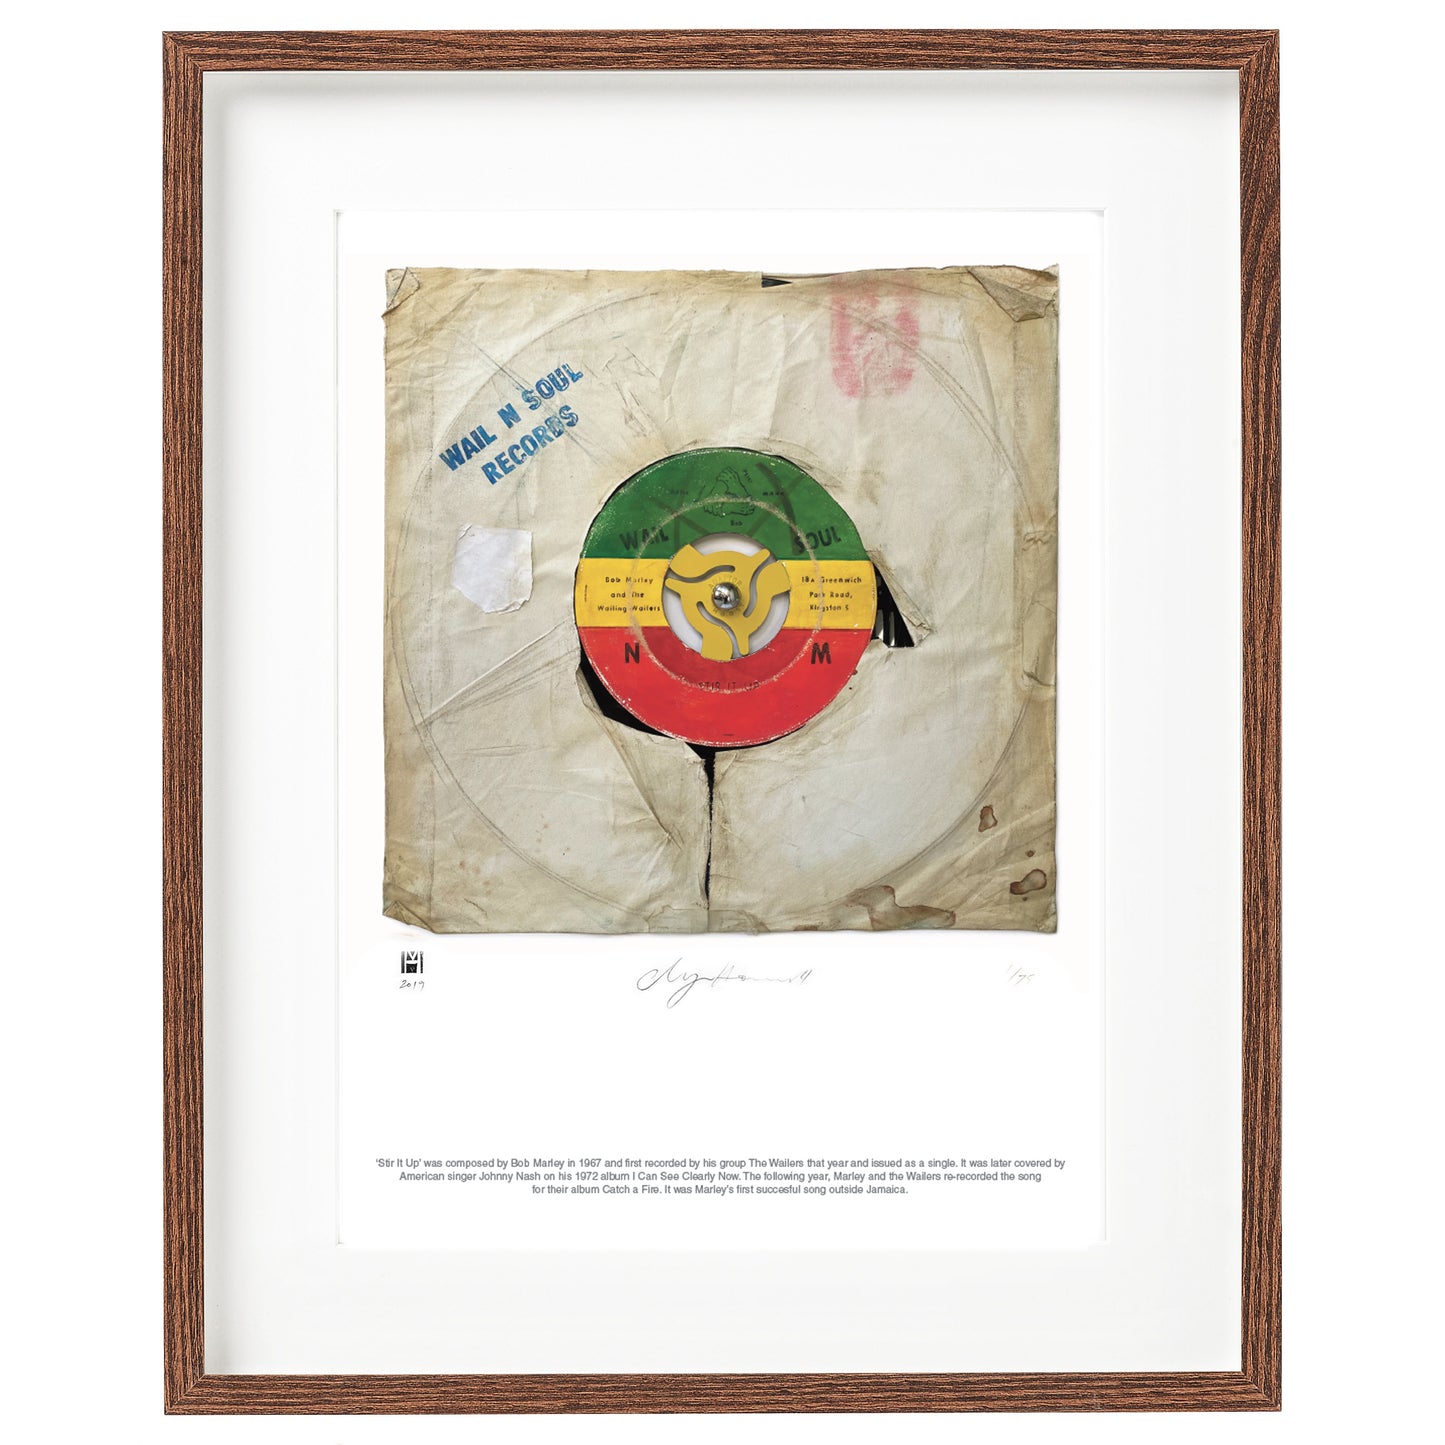 “Stir It Up" by Bob Marley and The Wailers Limited Edition Prints of Original Painting